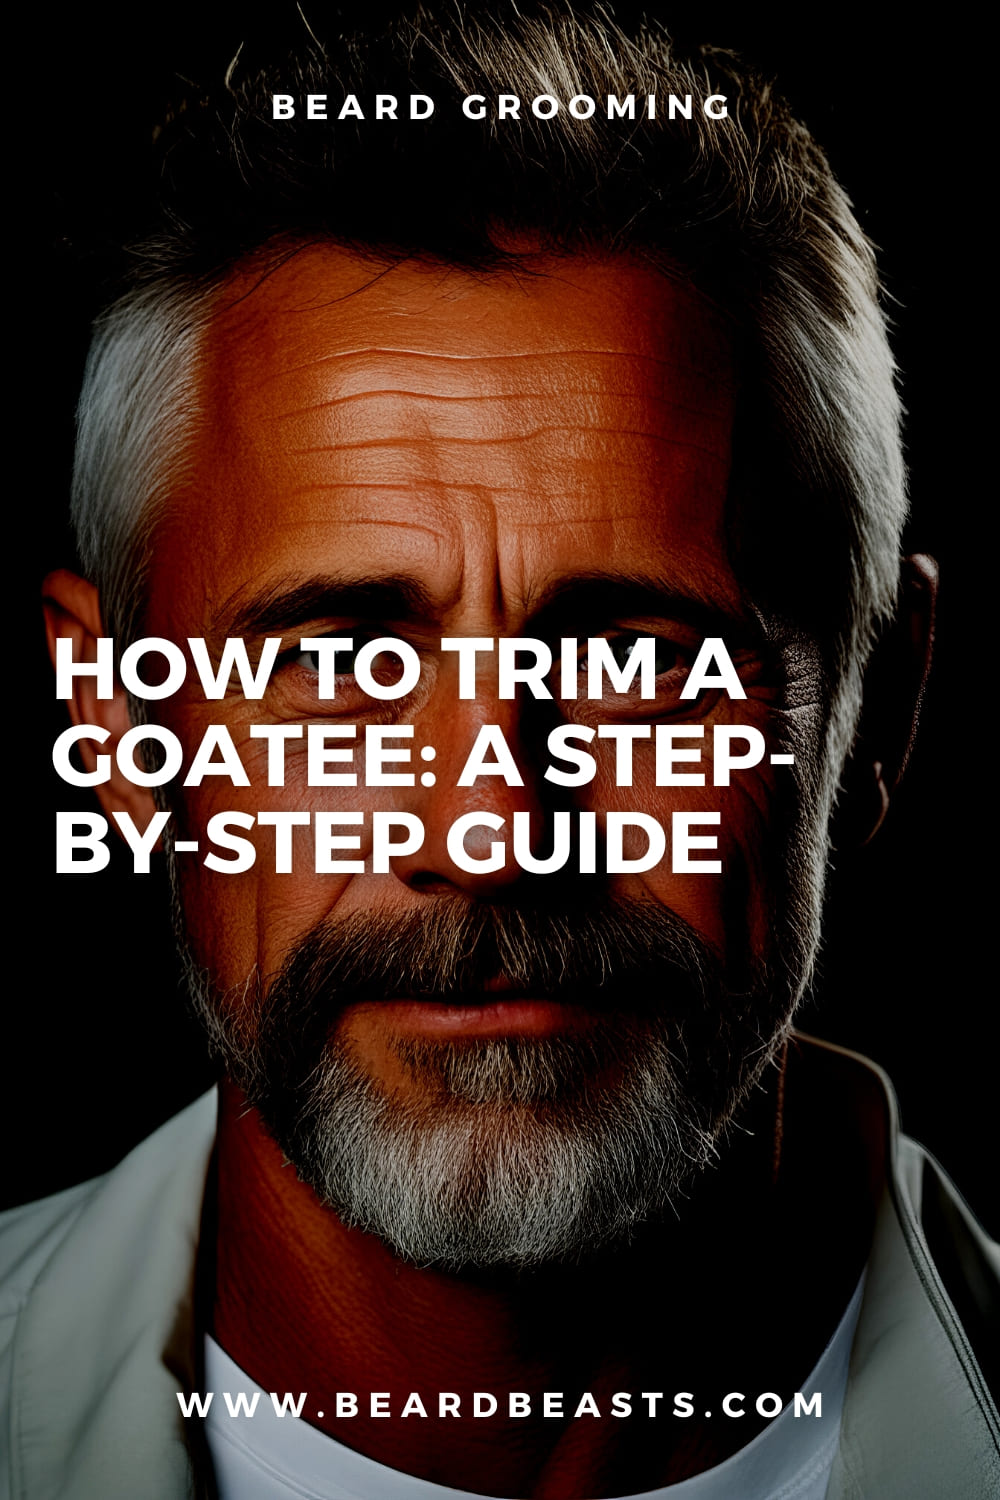 A promotional poster featuring a close-up of a man's lower face with a well-groomed salt-and-pepper goatee. The top of the poster reads "BEARD GROOMING" in large, bold letters, and a bold headline in the center states "HOW TO TRIM A GOATEE: A STEP-BY-STEP GUIDE".